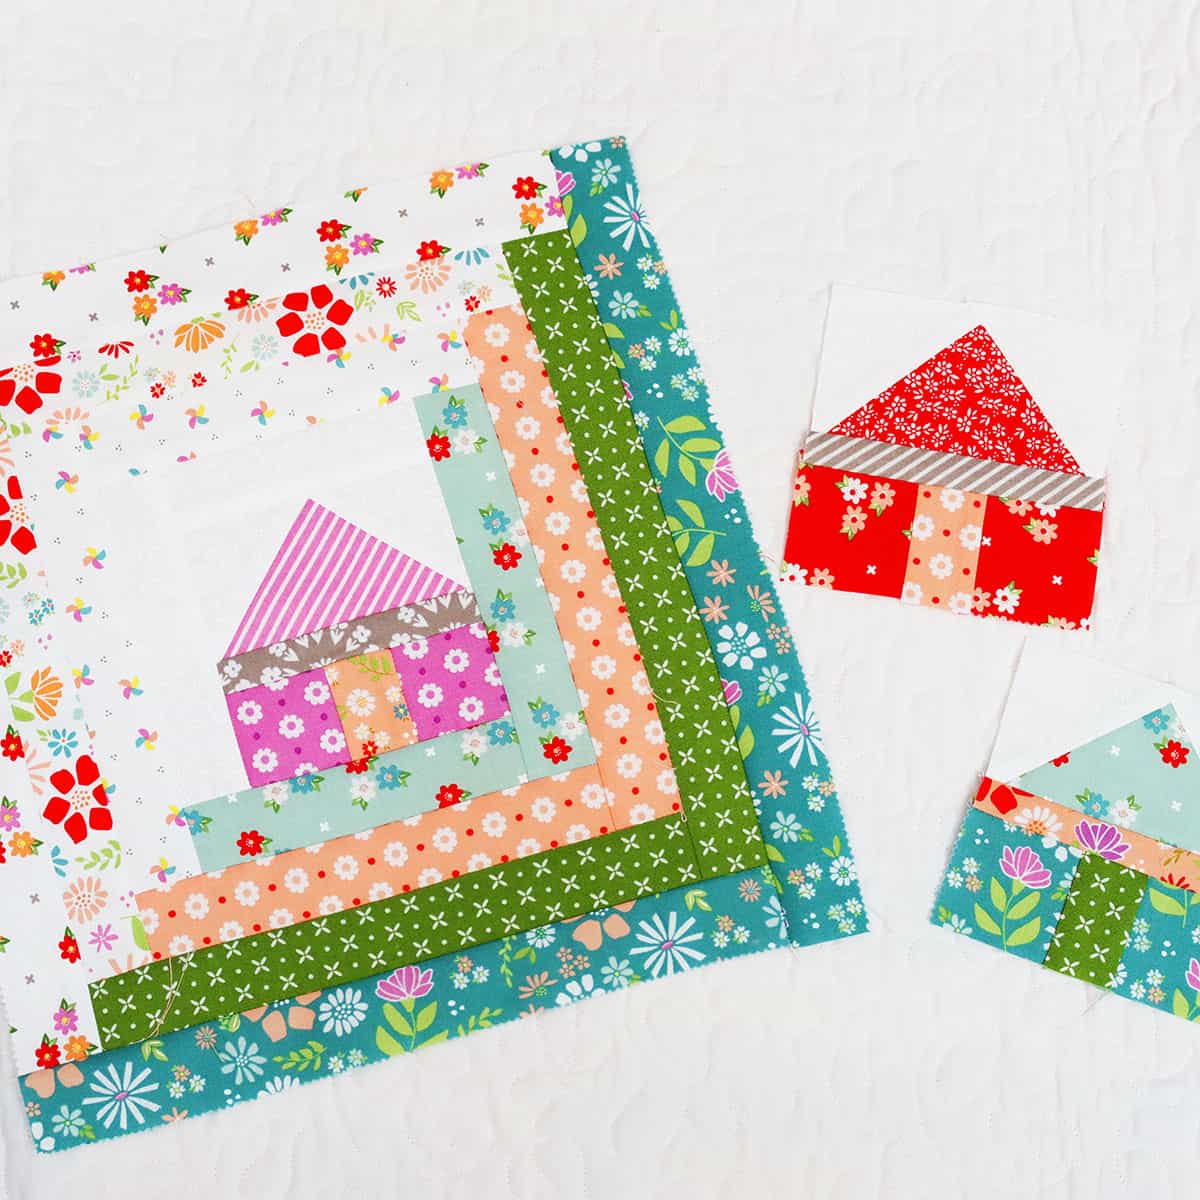 Heart of the Home Quilt Along log cabin block with house center